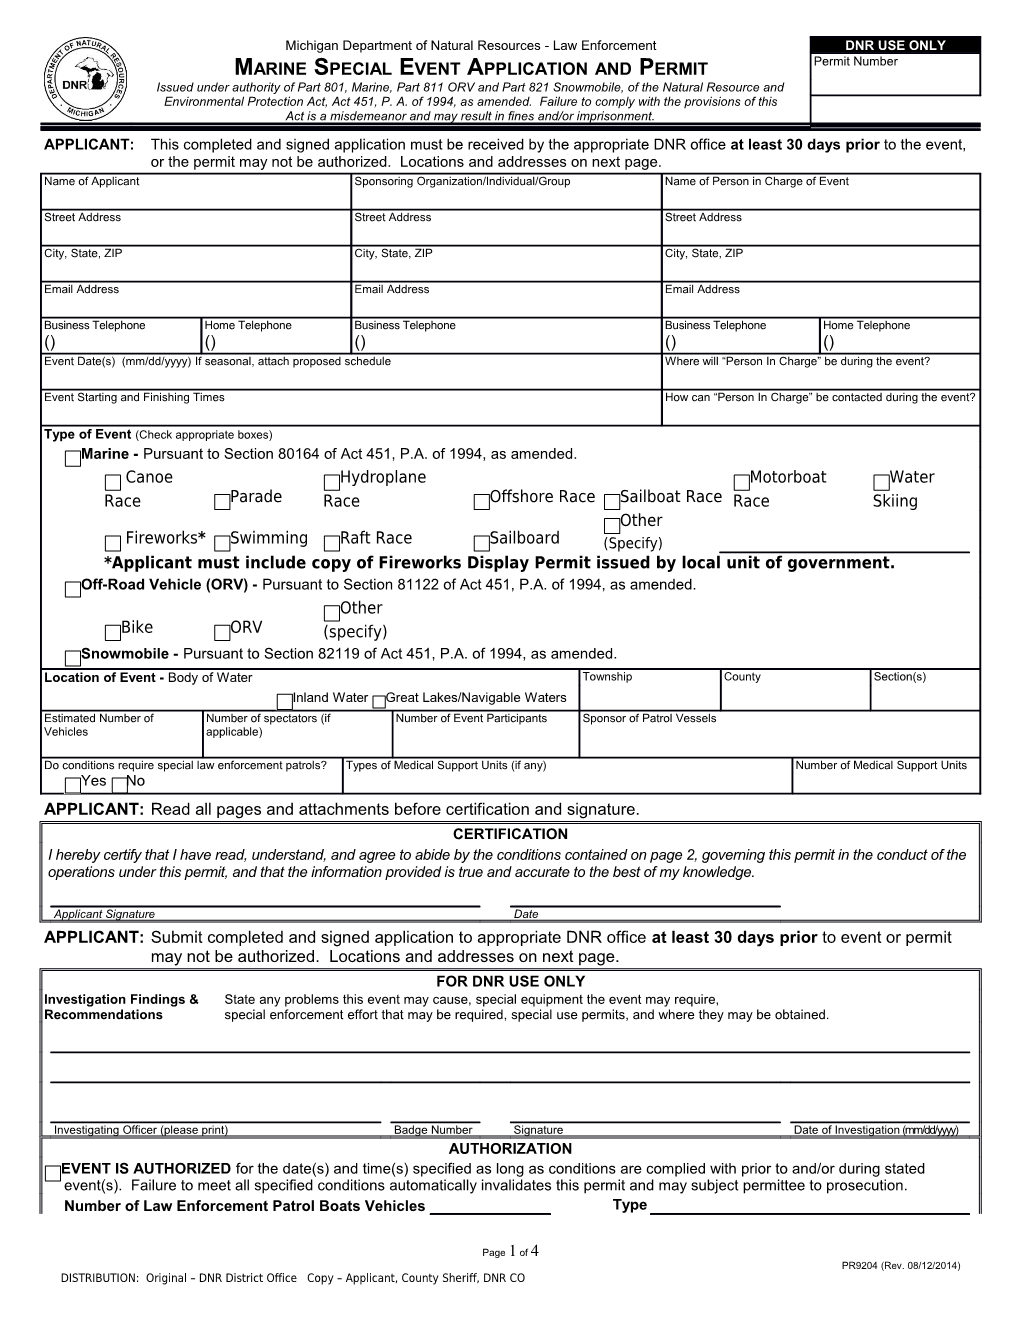 Marine Special Event Permit Application Form